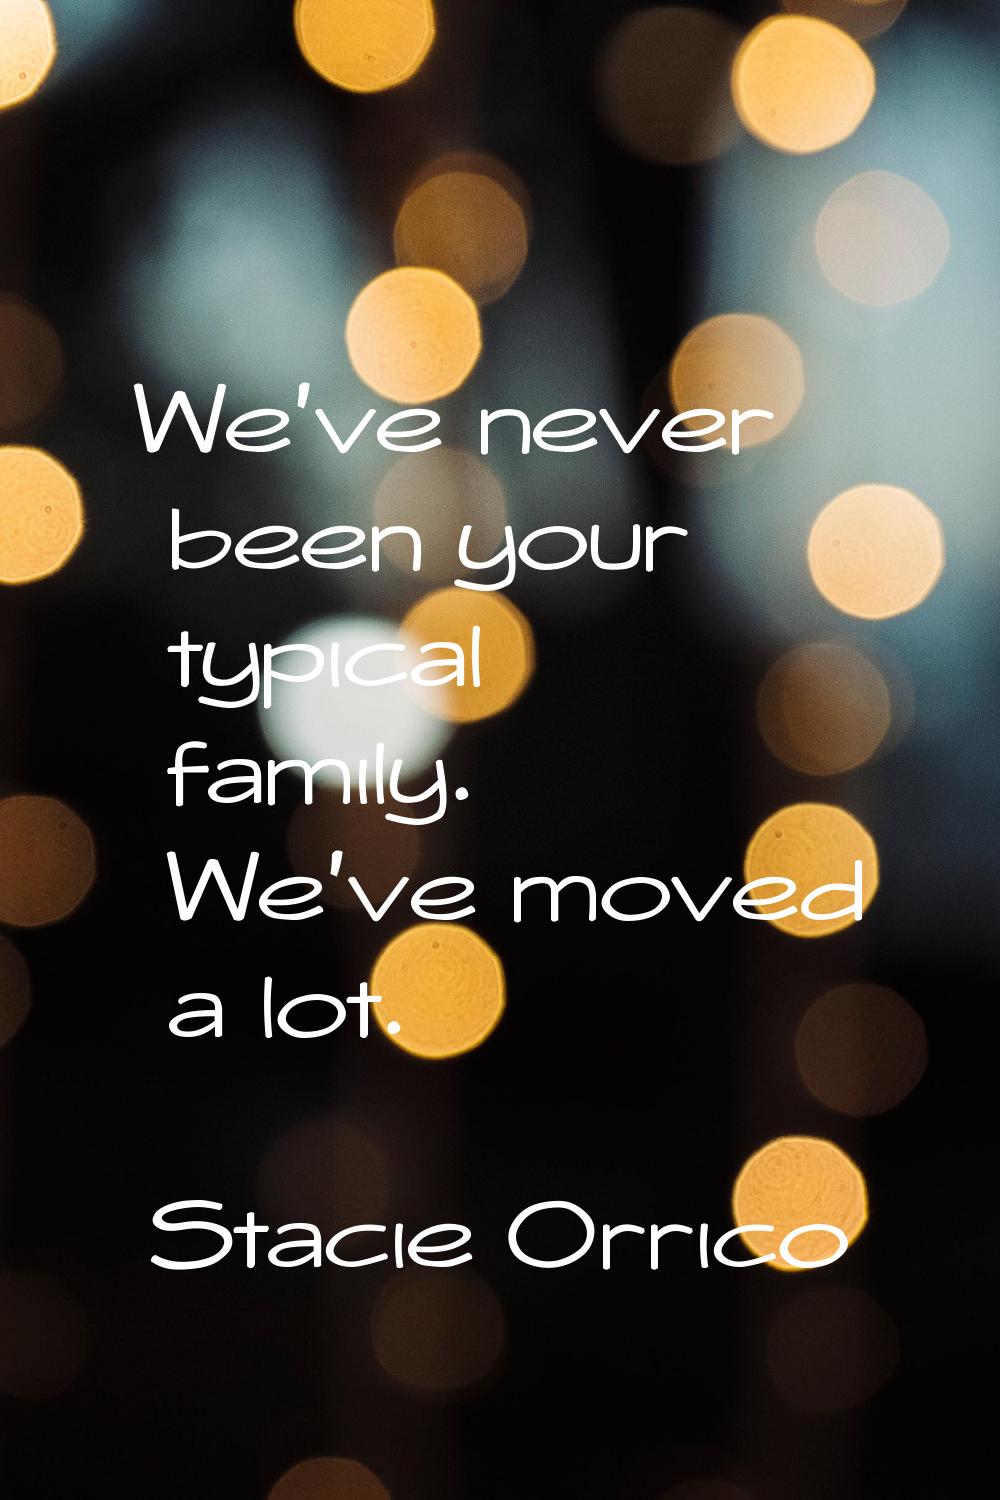 We've never been your typical family. We've moved a lot.